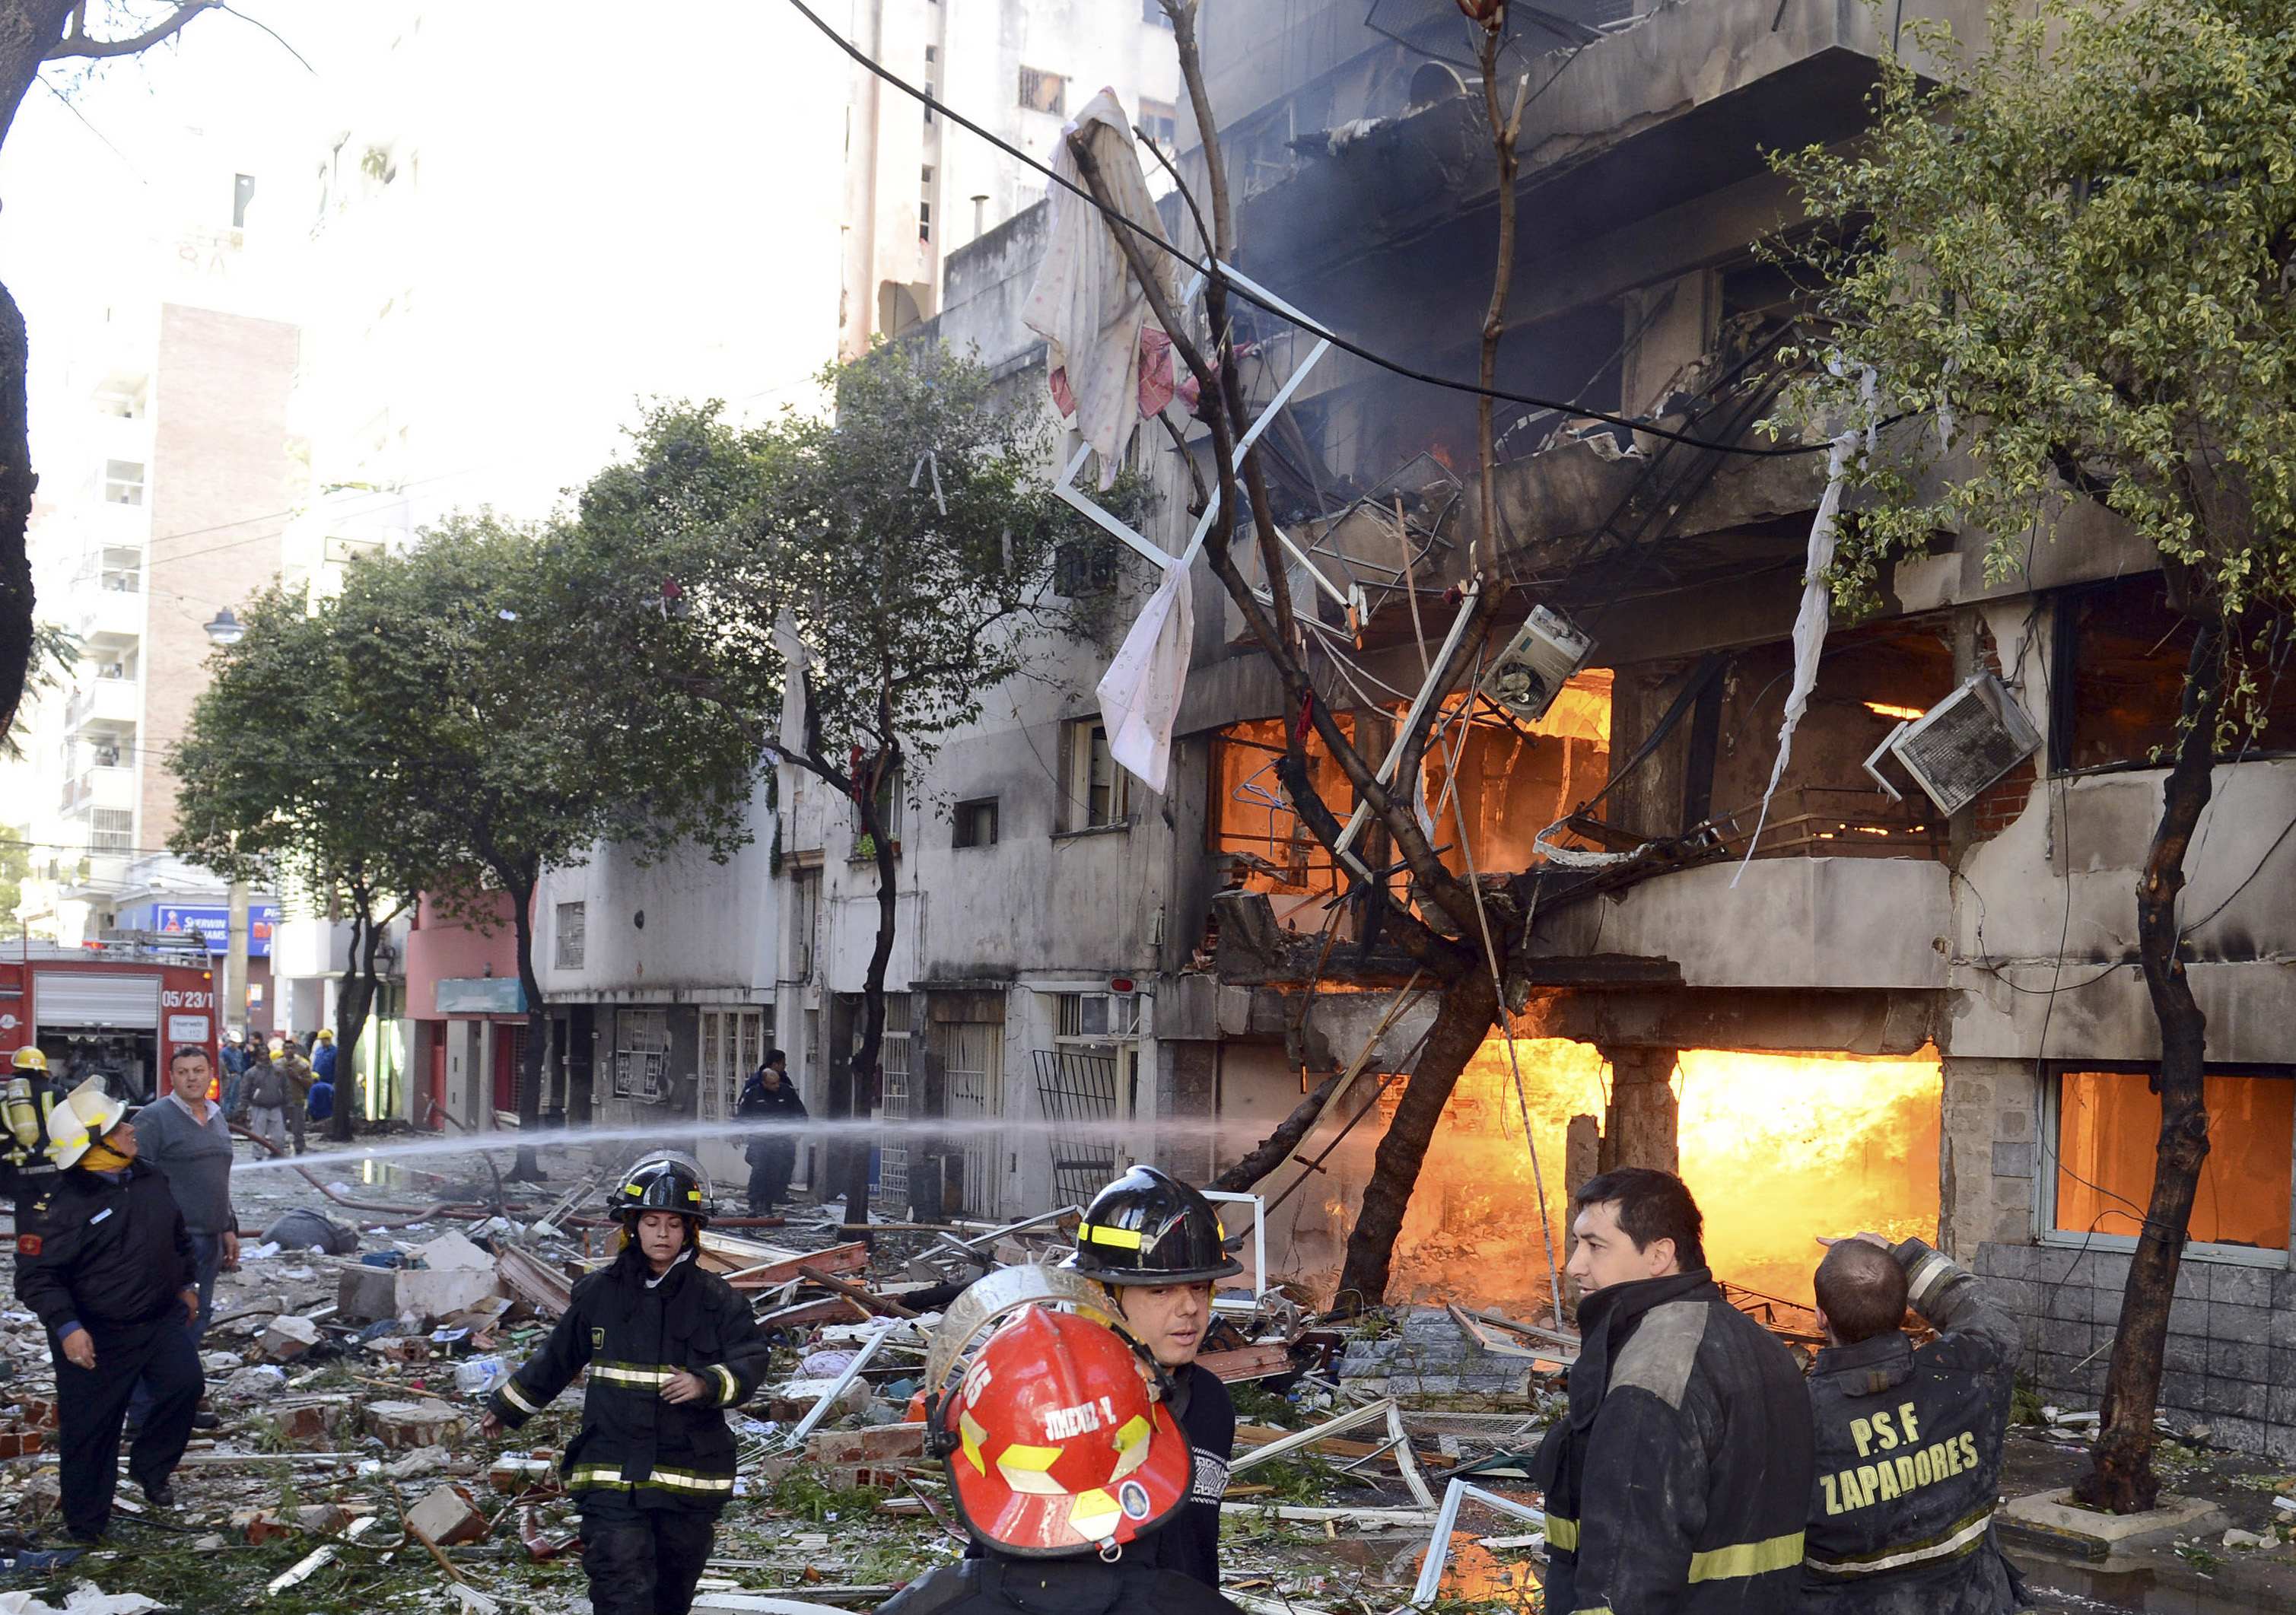 Building explosion in Argentina leaves at least 8 dead